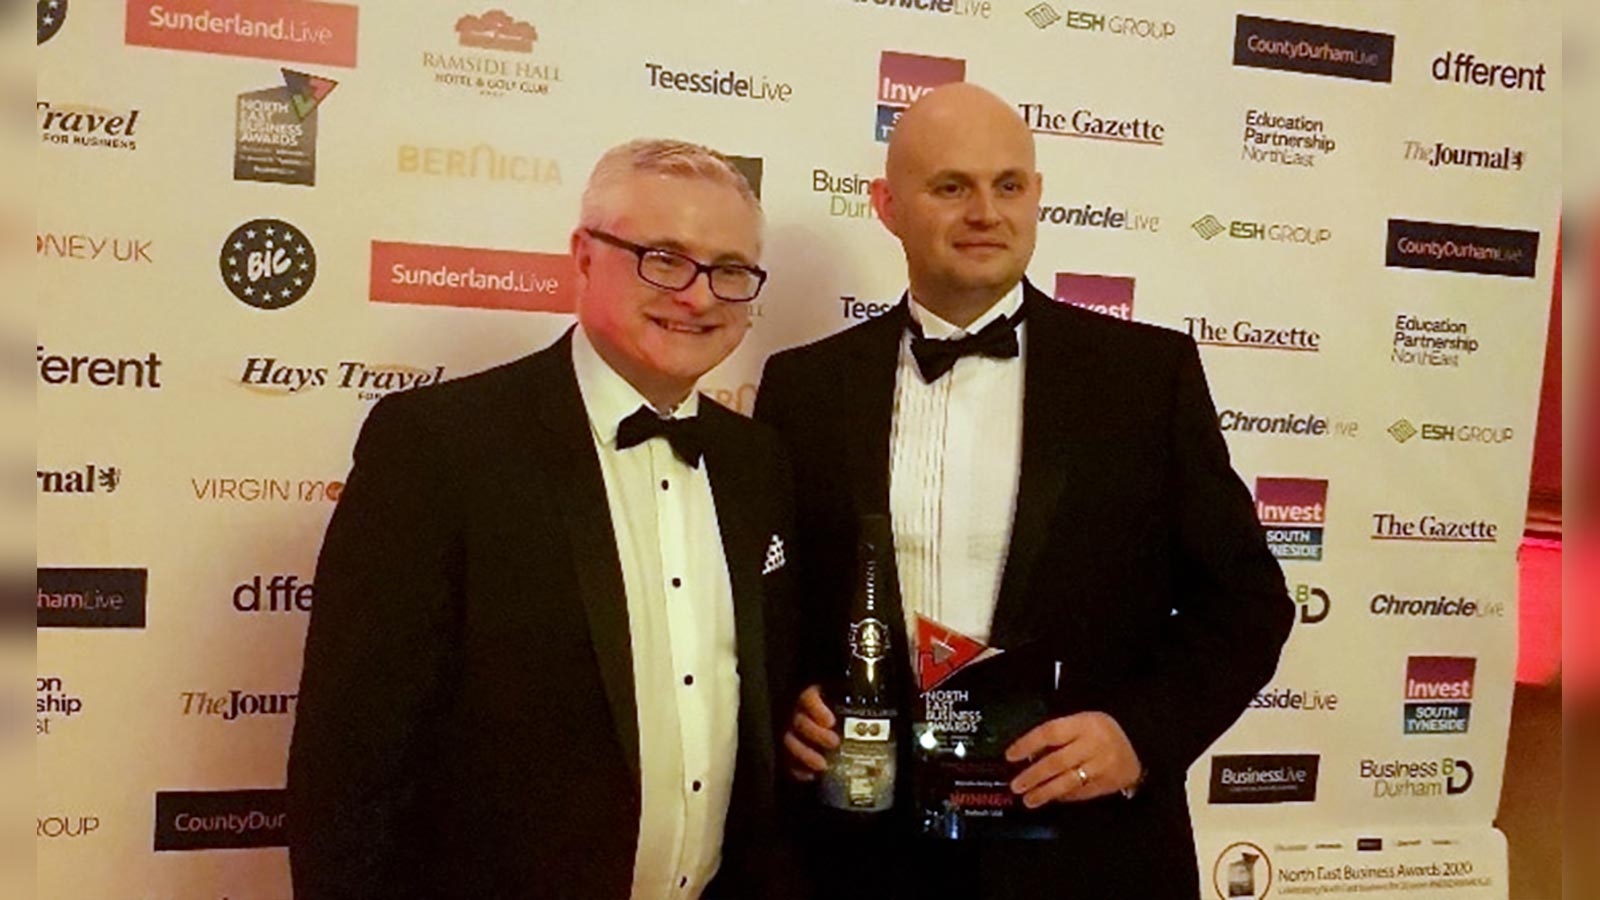 Sotech Wins Manufacturing Award at North East Business Awards